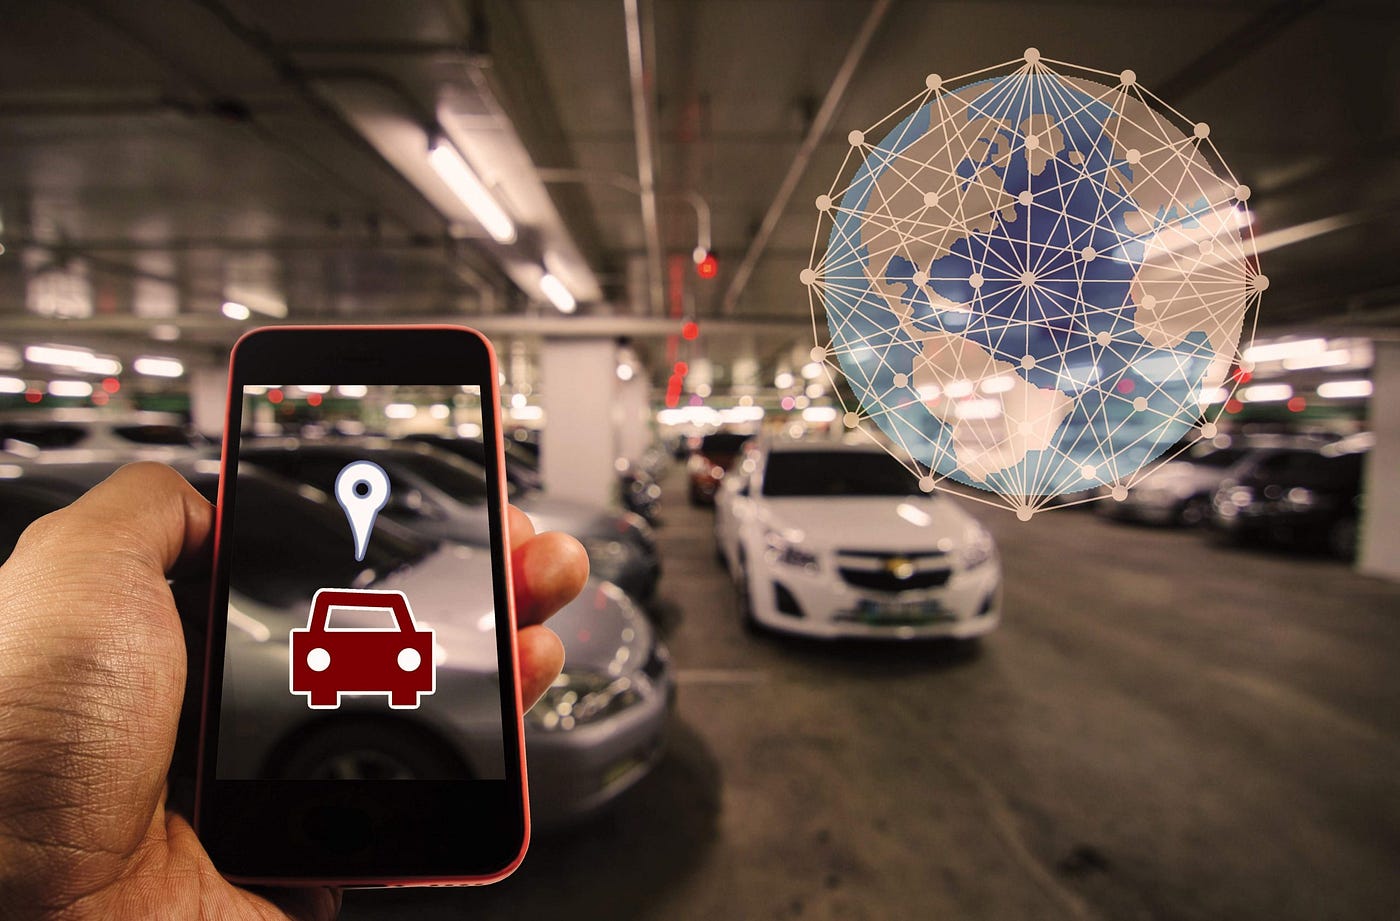 Solving Parking Challenges with Smart Solutions and Innovations